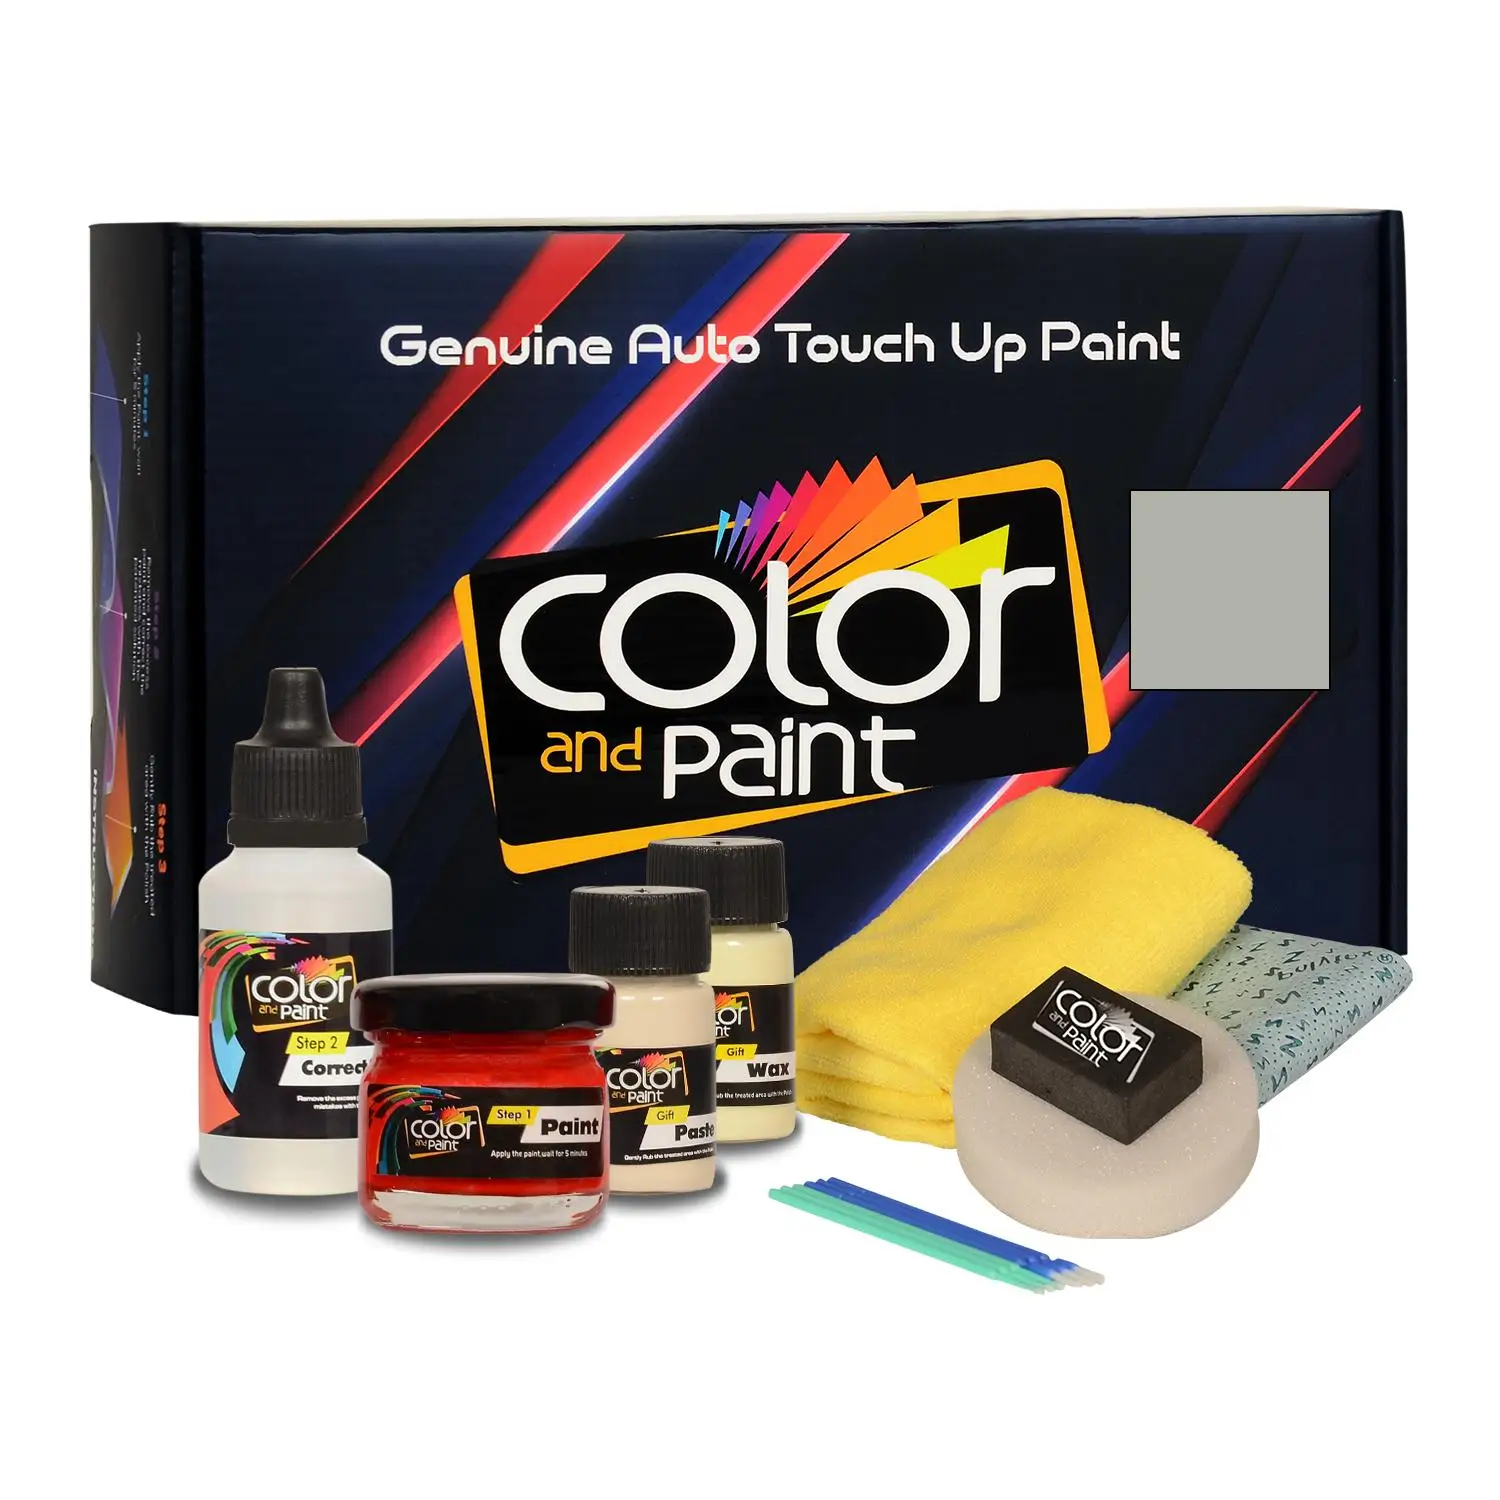 

Color and Paint compatible with Mitsubishi Australia Automotive Touch Up Paint - GENTILE SILVER MET - BG - Basic Care